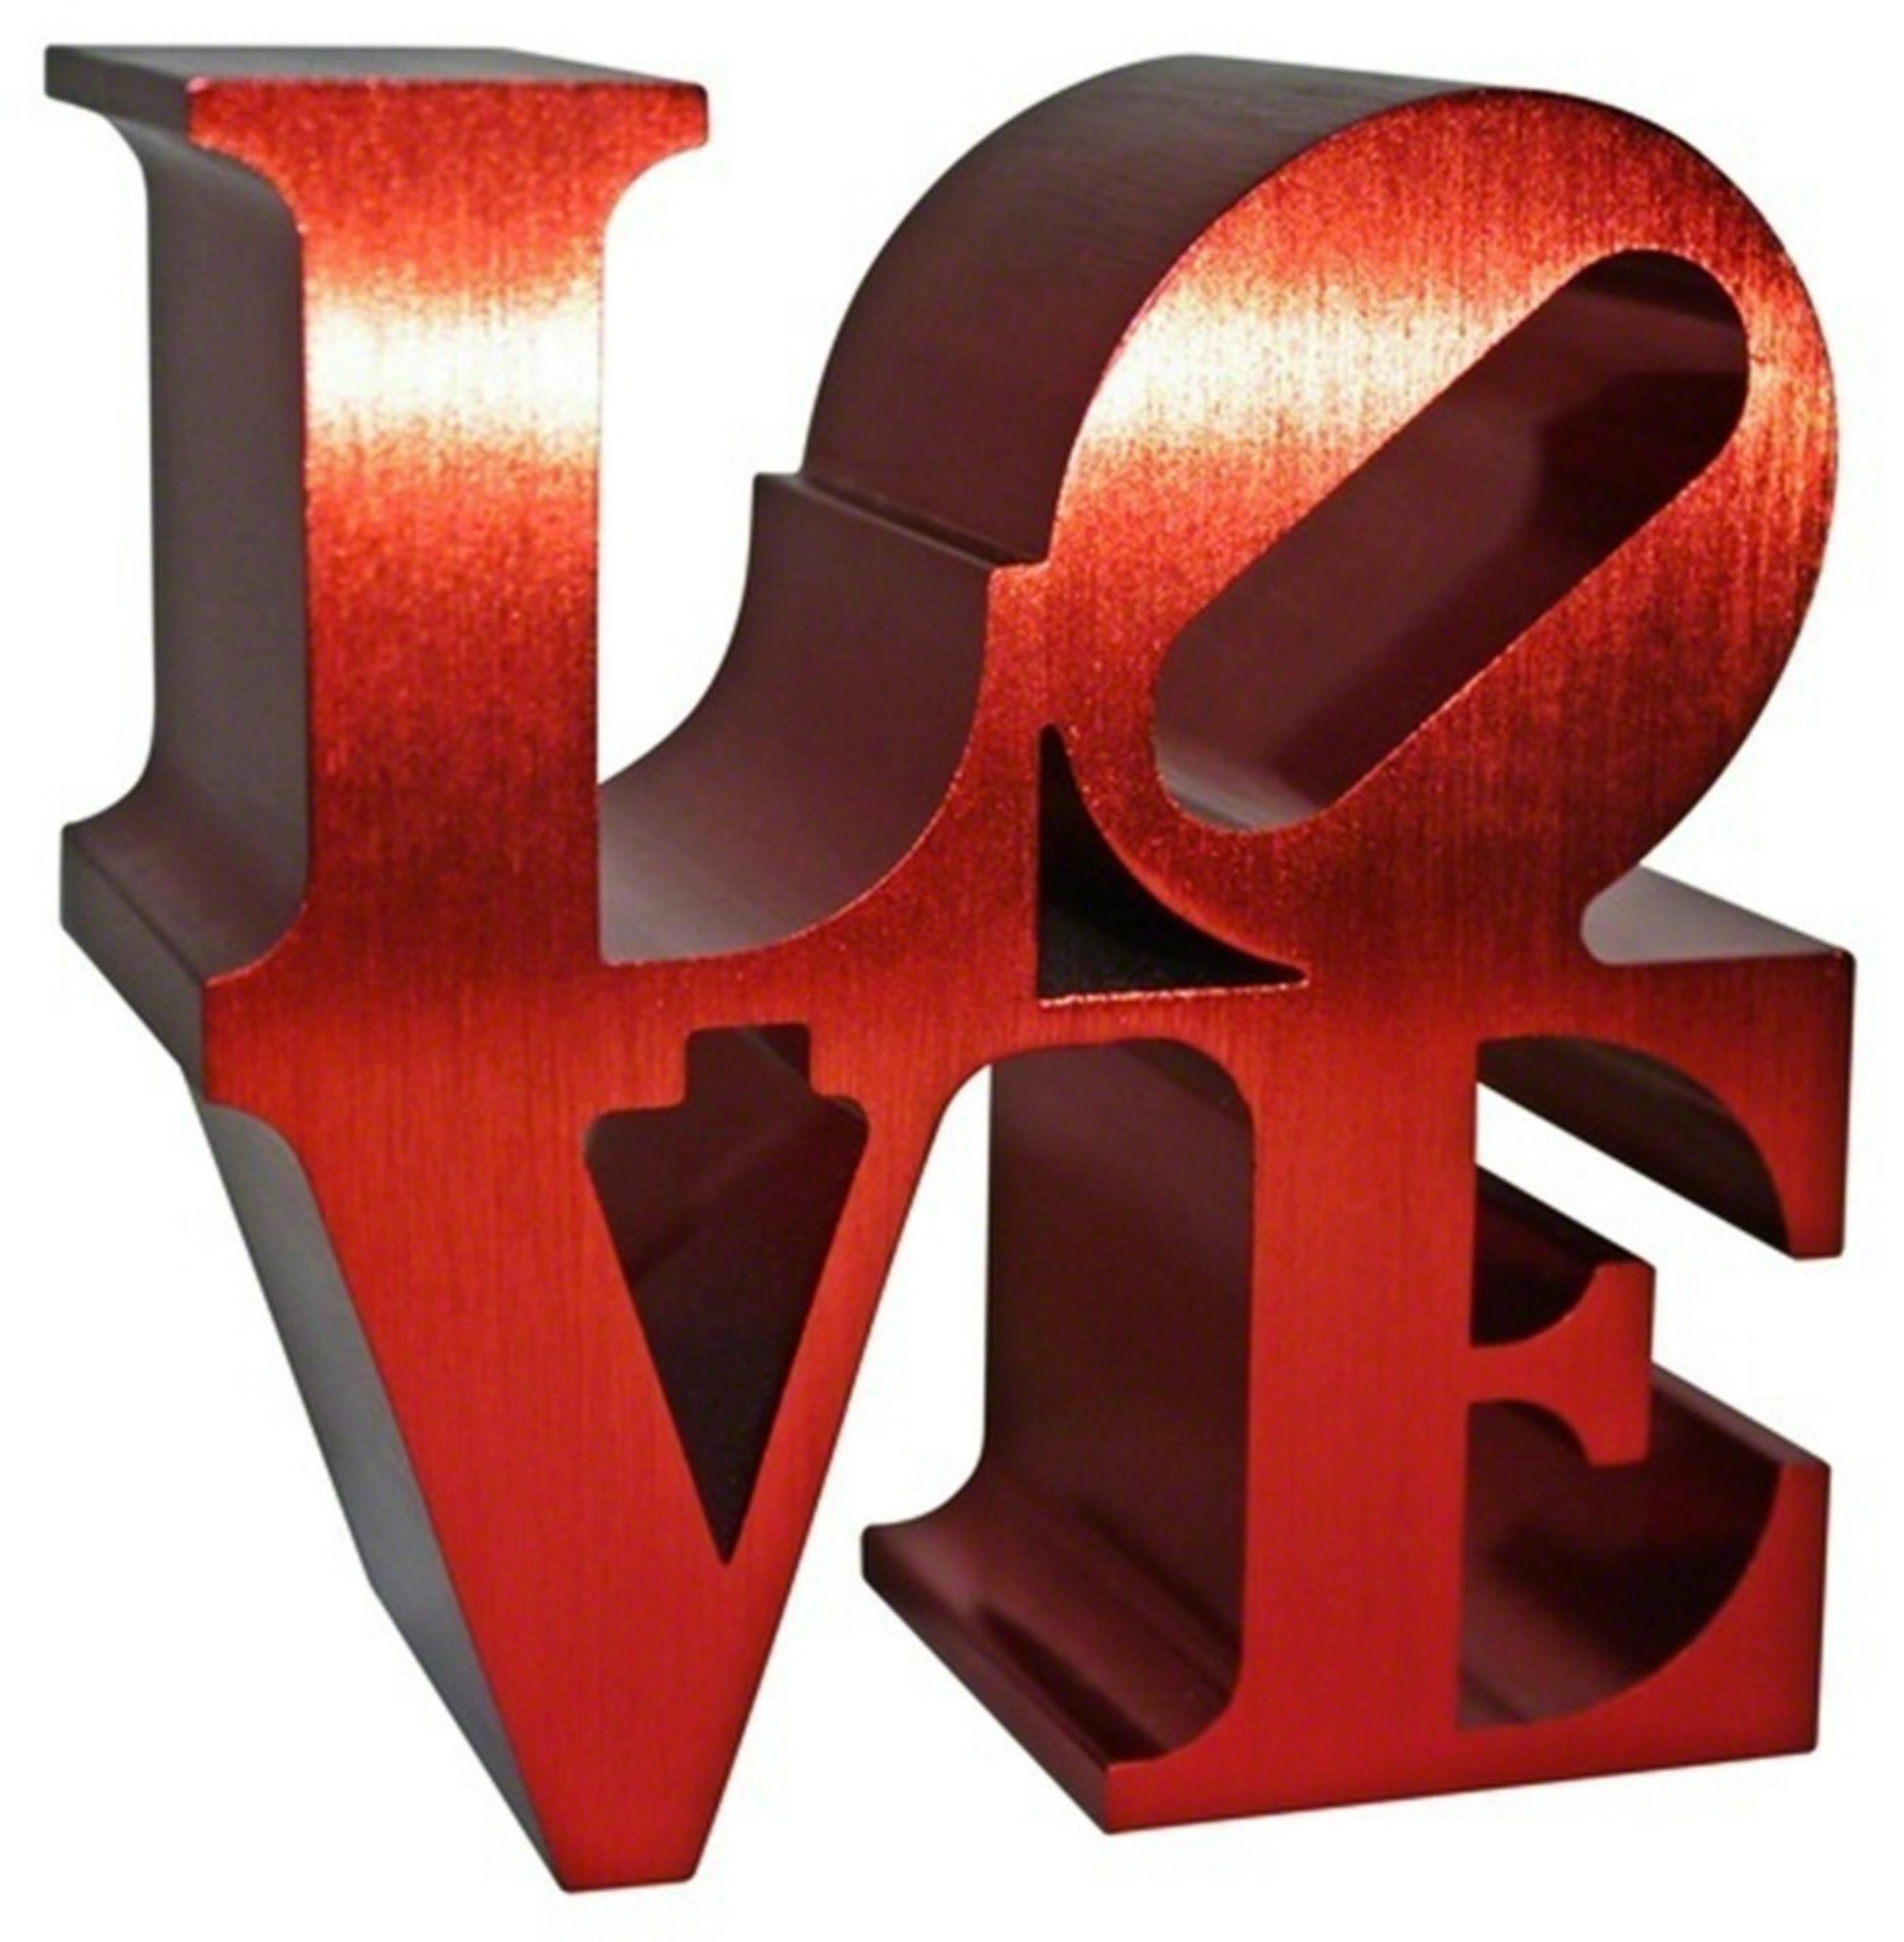 Robert Indiana Abstract Sculpture - LOVE replica sculpture Artist Copyright Indianapolis Museum & Foundation Stamped